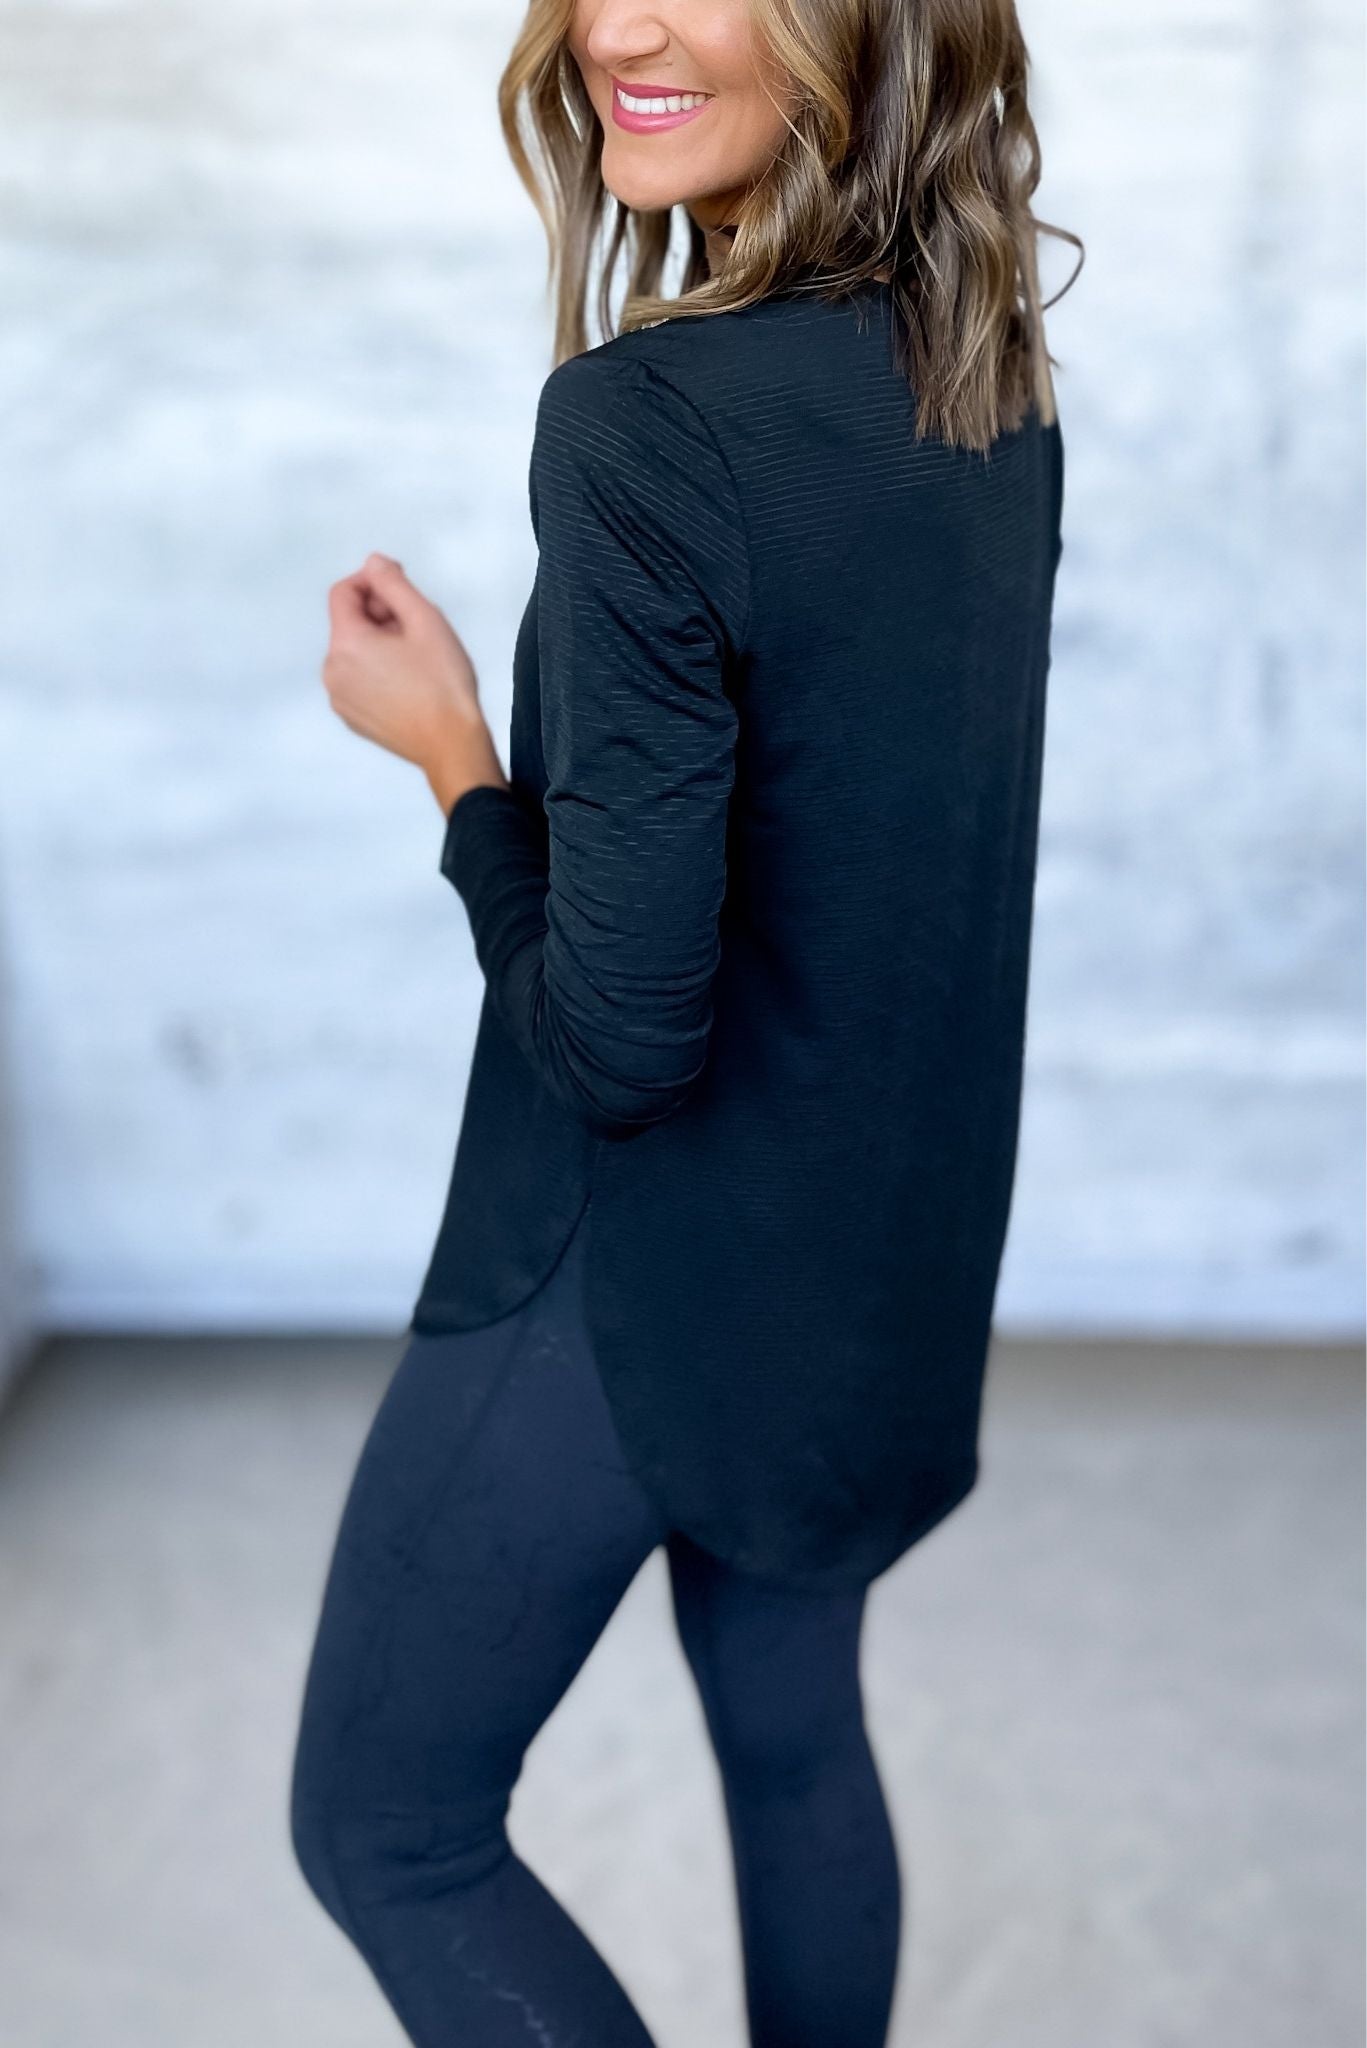 black ribbed long sleeve top with side slits, September athleisure collection, gym style, fitness fashion, shop style your senses by mallory fitzsimmons